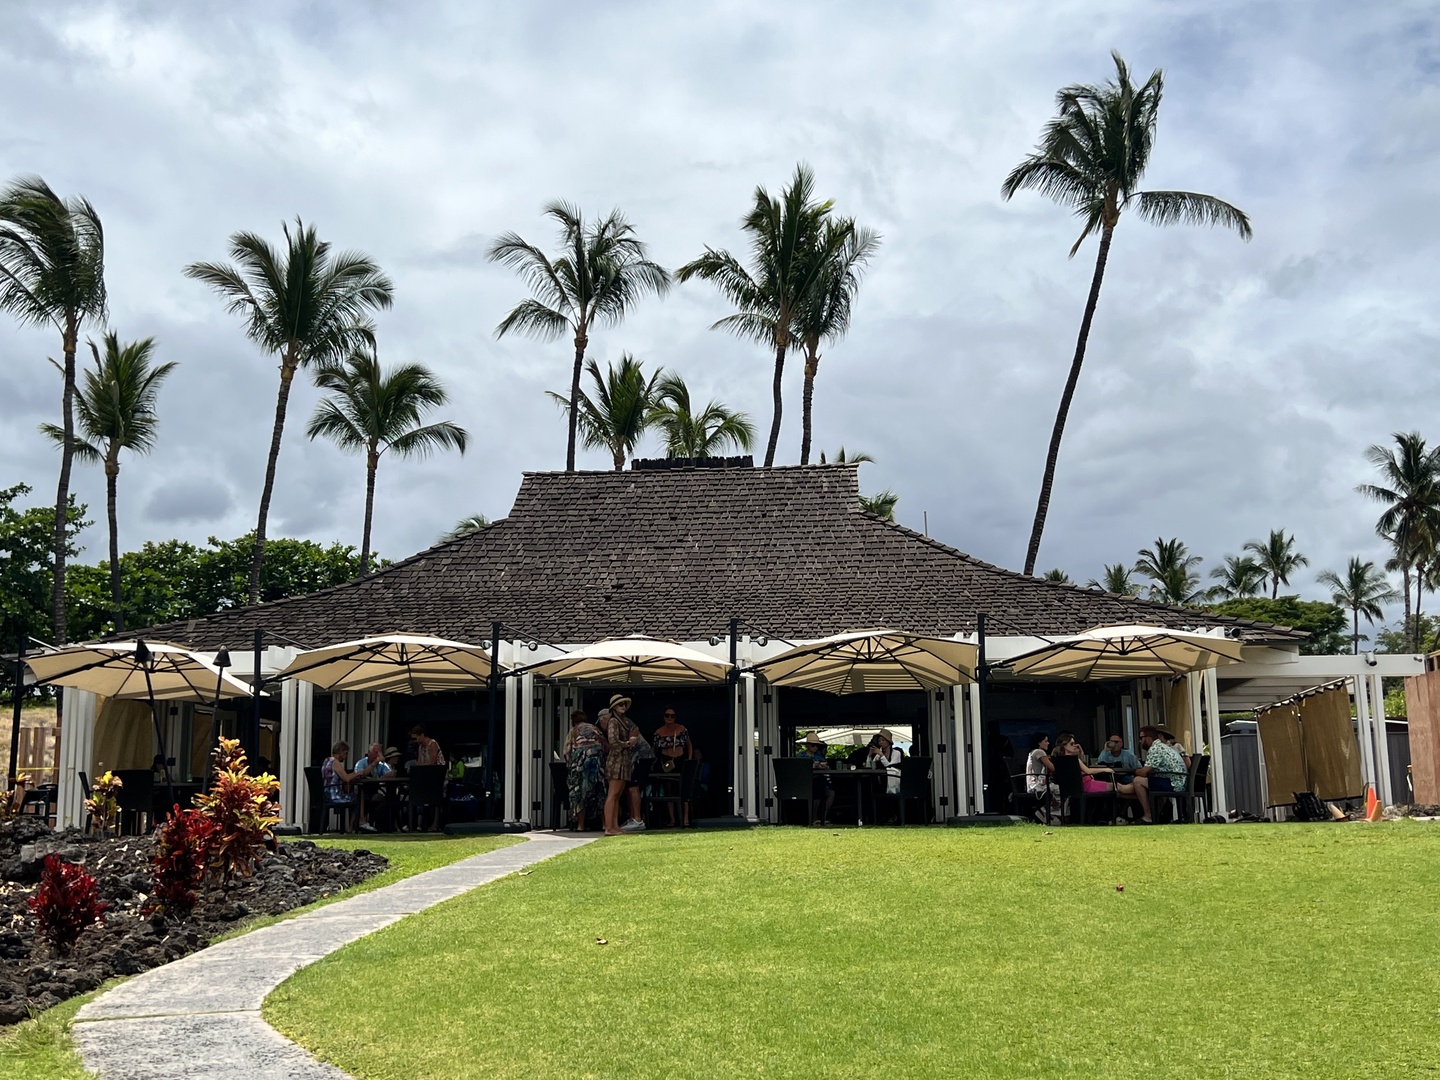 Kamuela Vacation Rentals, Mauna Lani Fairways #603 - Dine Amidst the Breezes at Our Open-Air Beachside Restaurant, Where the Waves Serenade Every Bite.